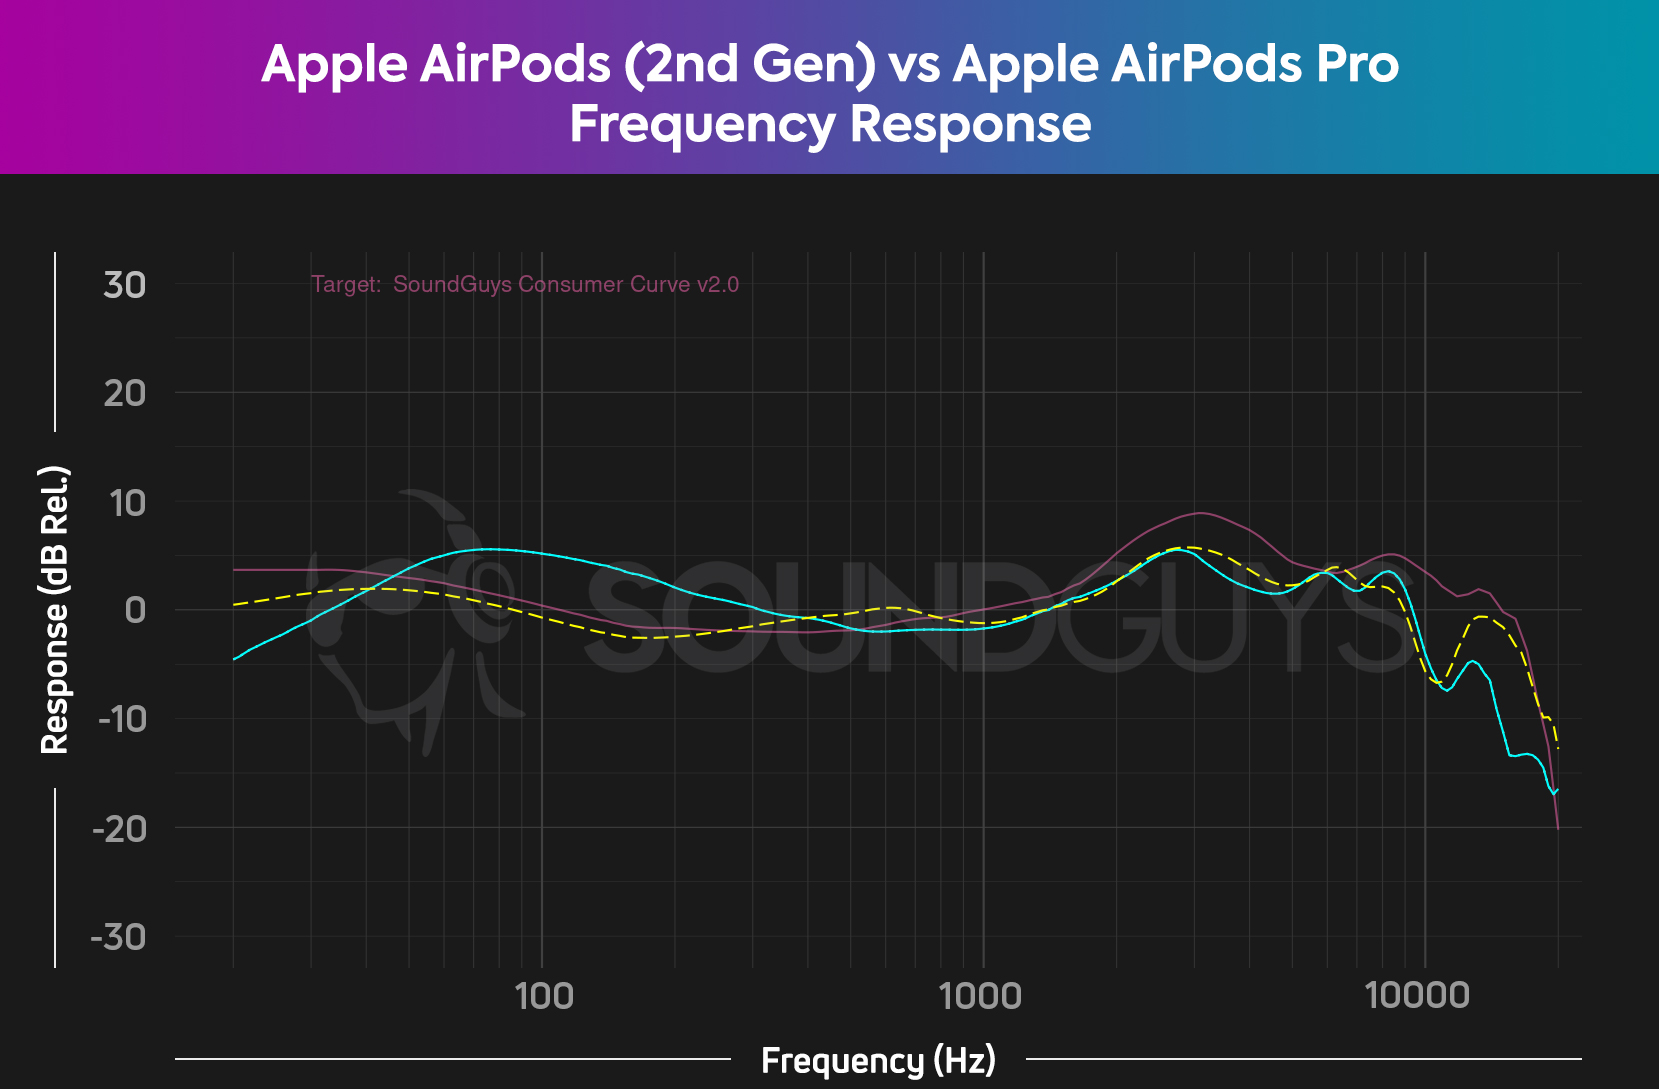 A comparison chart of the Apple AirPods (2nd generation) (cyan) vs AirPods Pro (yellow dash) frequency responses, which shows the AirPods Pro has a more consistent volume output across the frequency range compared to the AirPods.